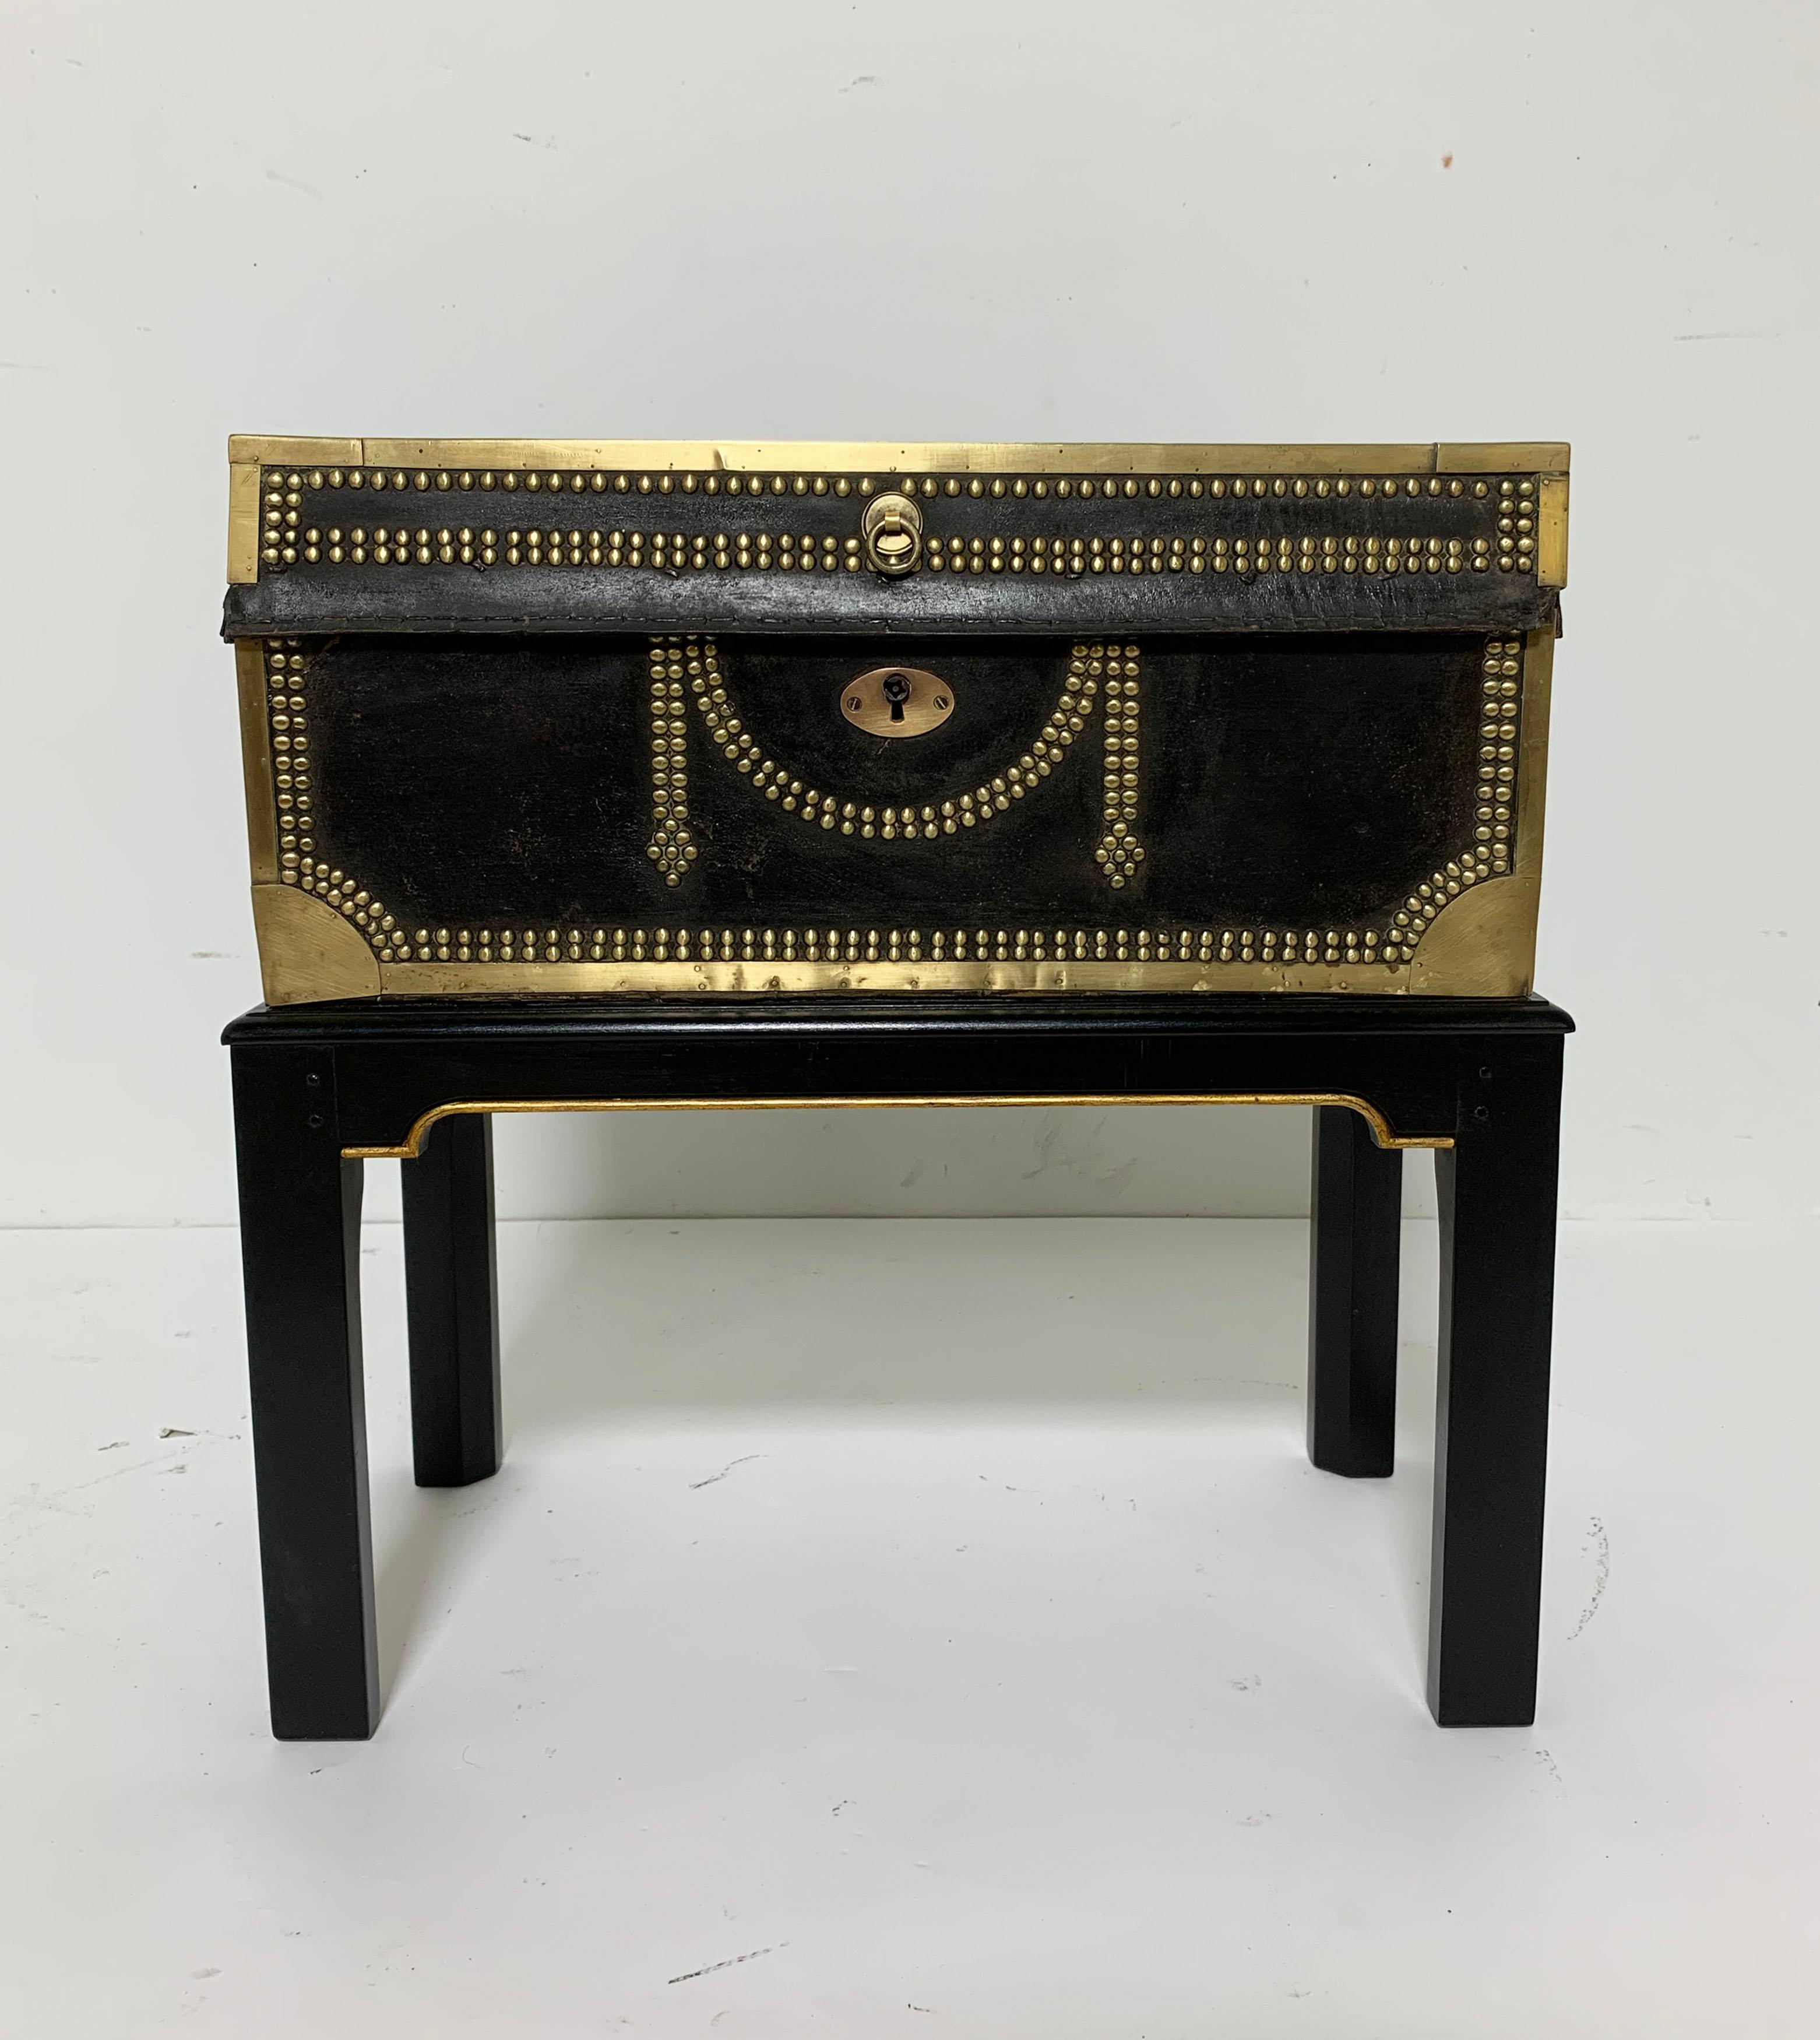 English brass studded leather and camphorwood military chest, circa 1820s. Fitted on (and removable from) a vintage lacquered wood stand.